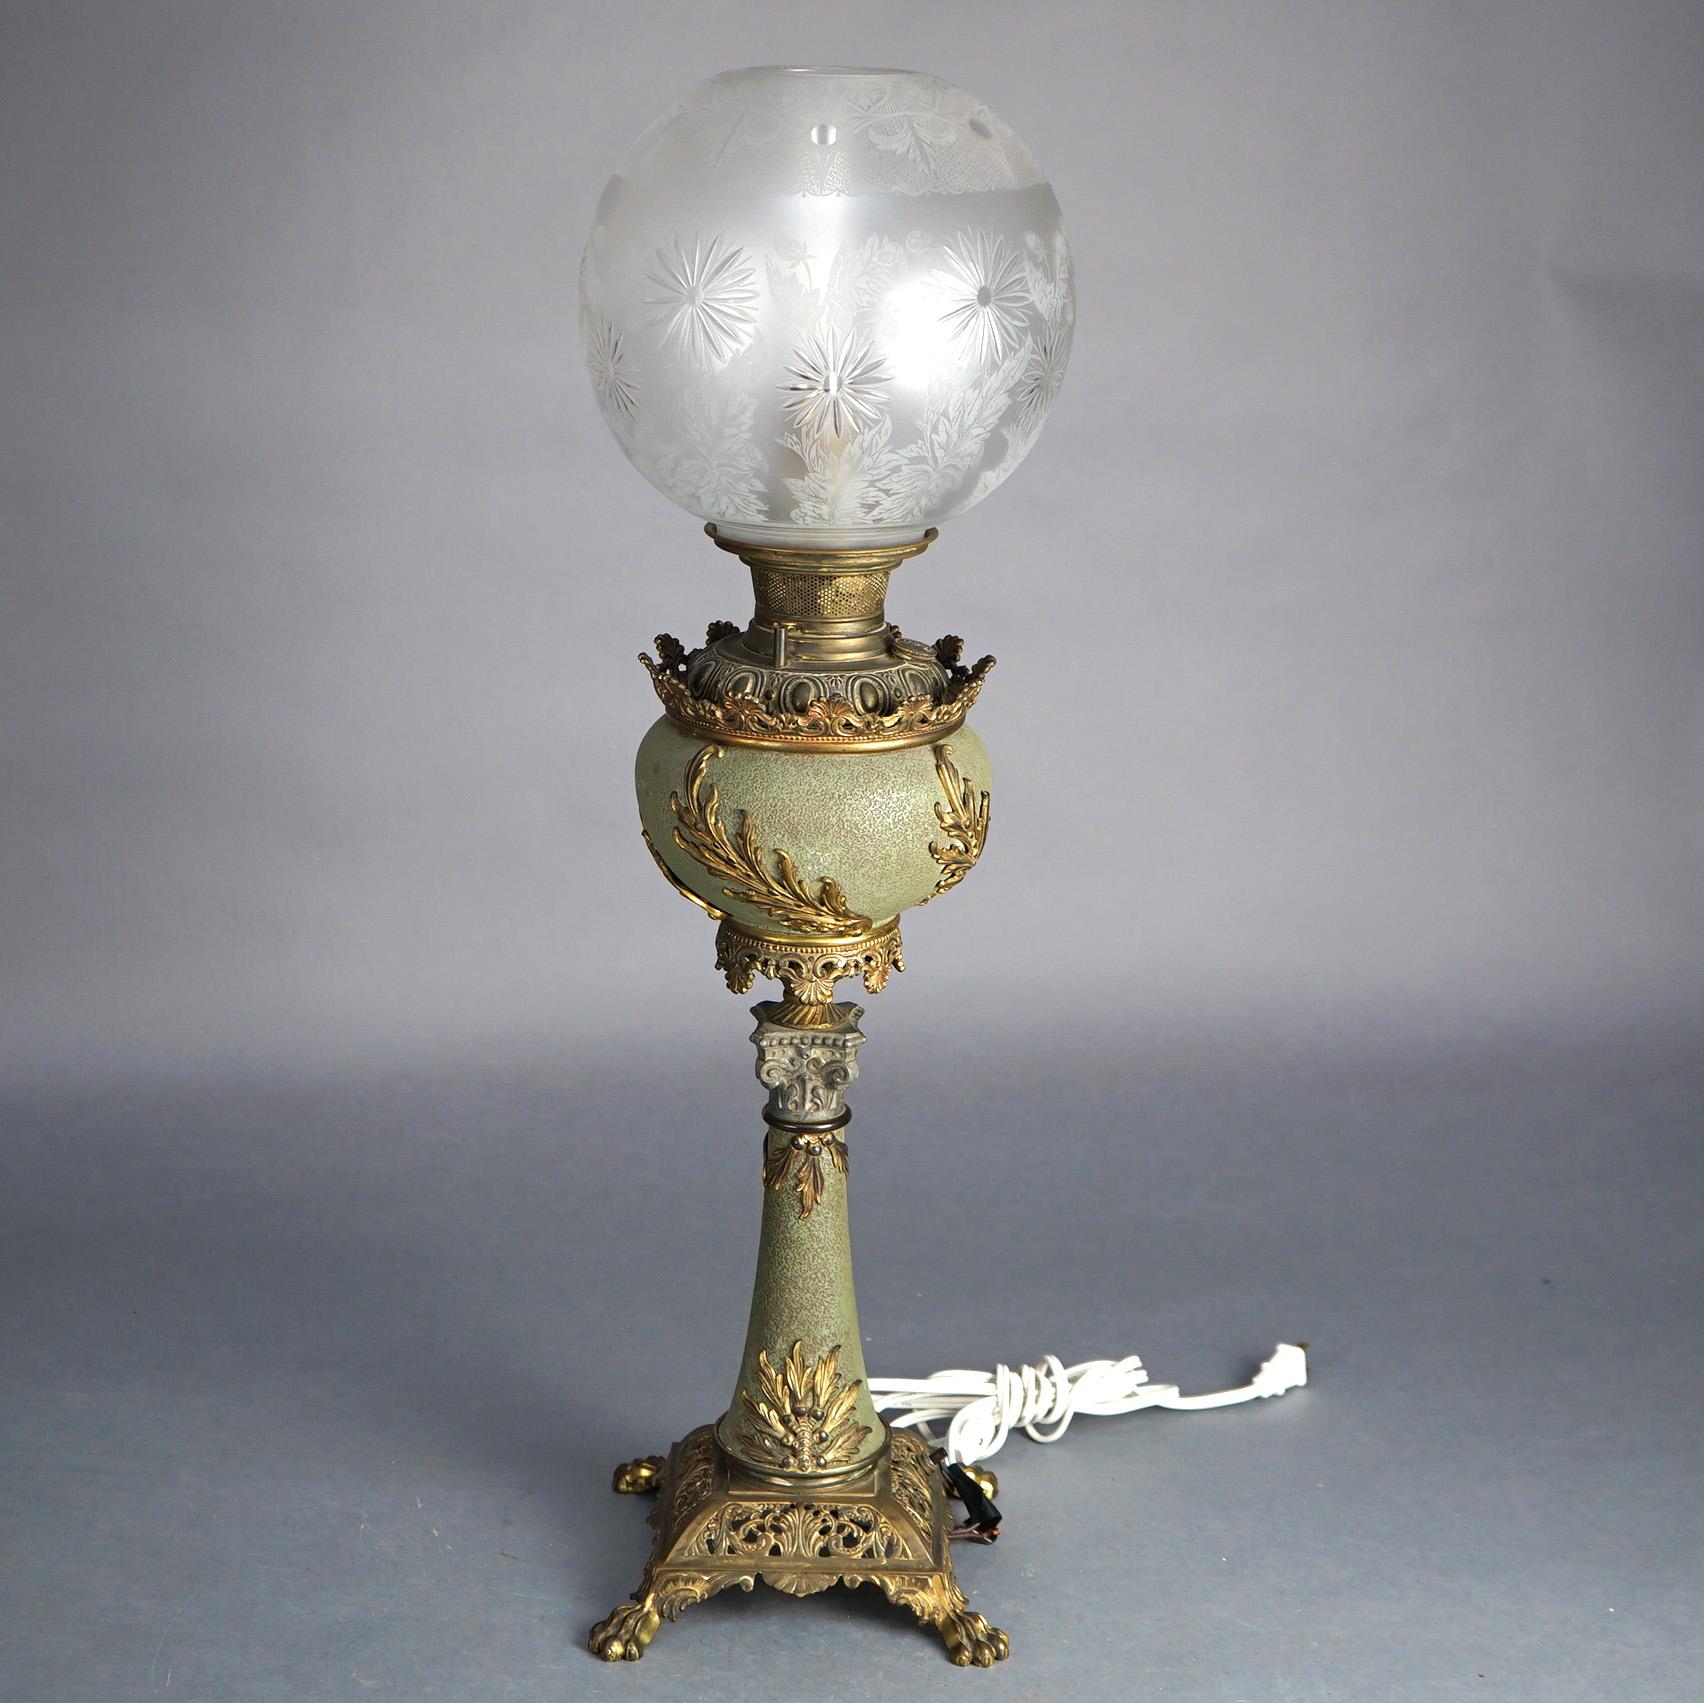 Antique Bradley & Hubbard Classical Brass Parlor Lamp with Base having Verdigris Finish, Foliate Elements and Etched Glass Shade, Electrified, C1890

Measures- 31''H x 8.5''W x 8.5''D